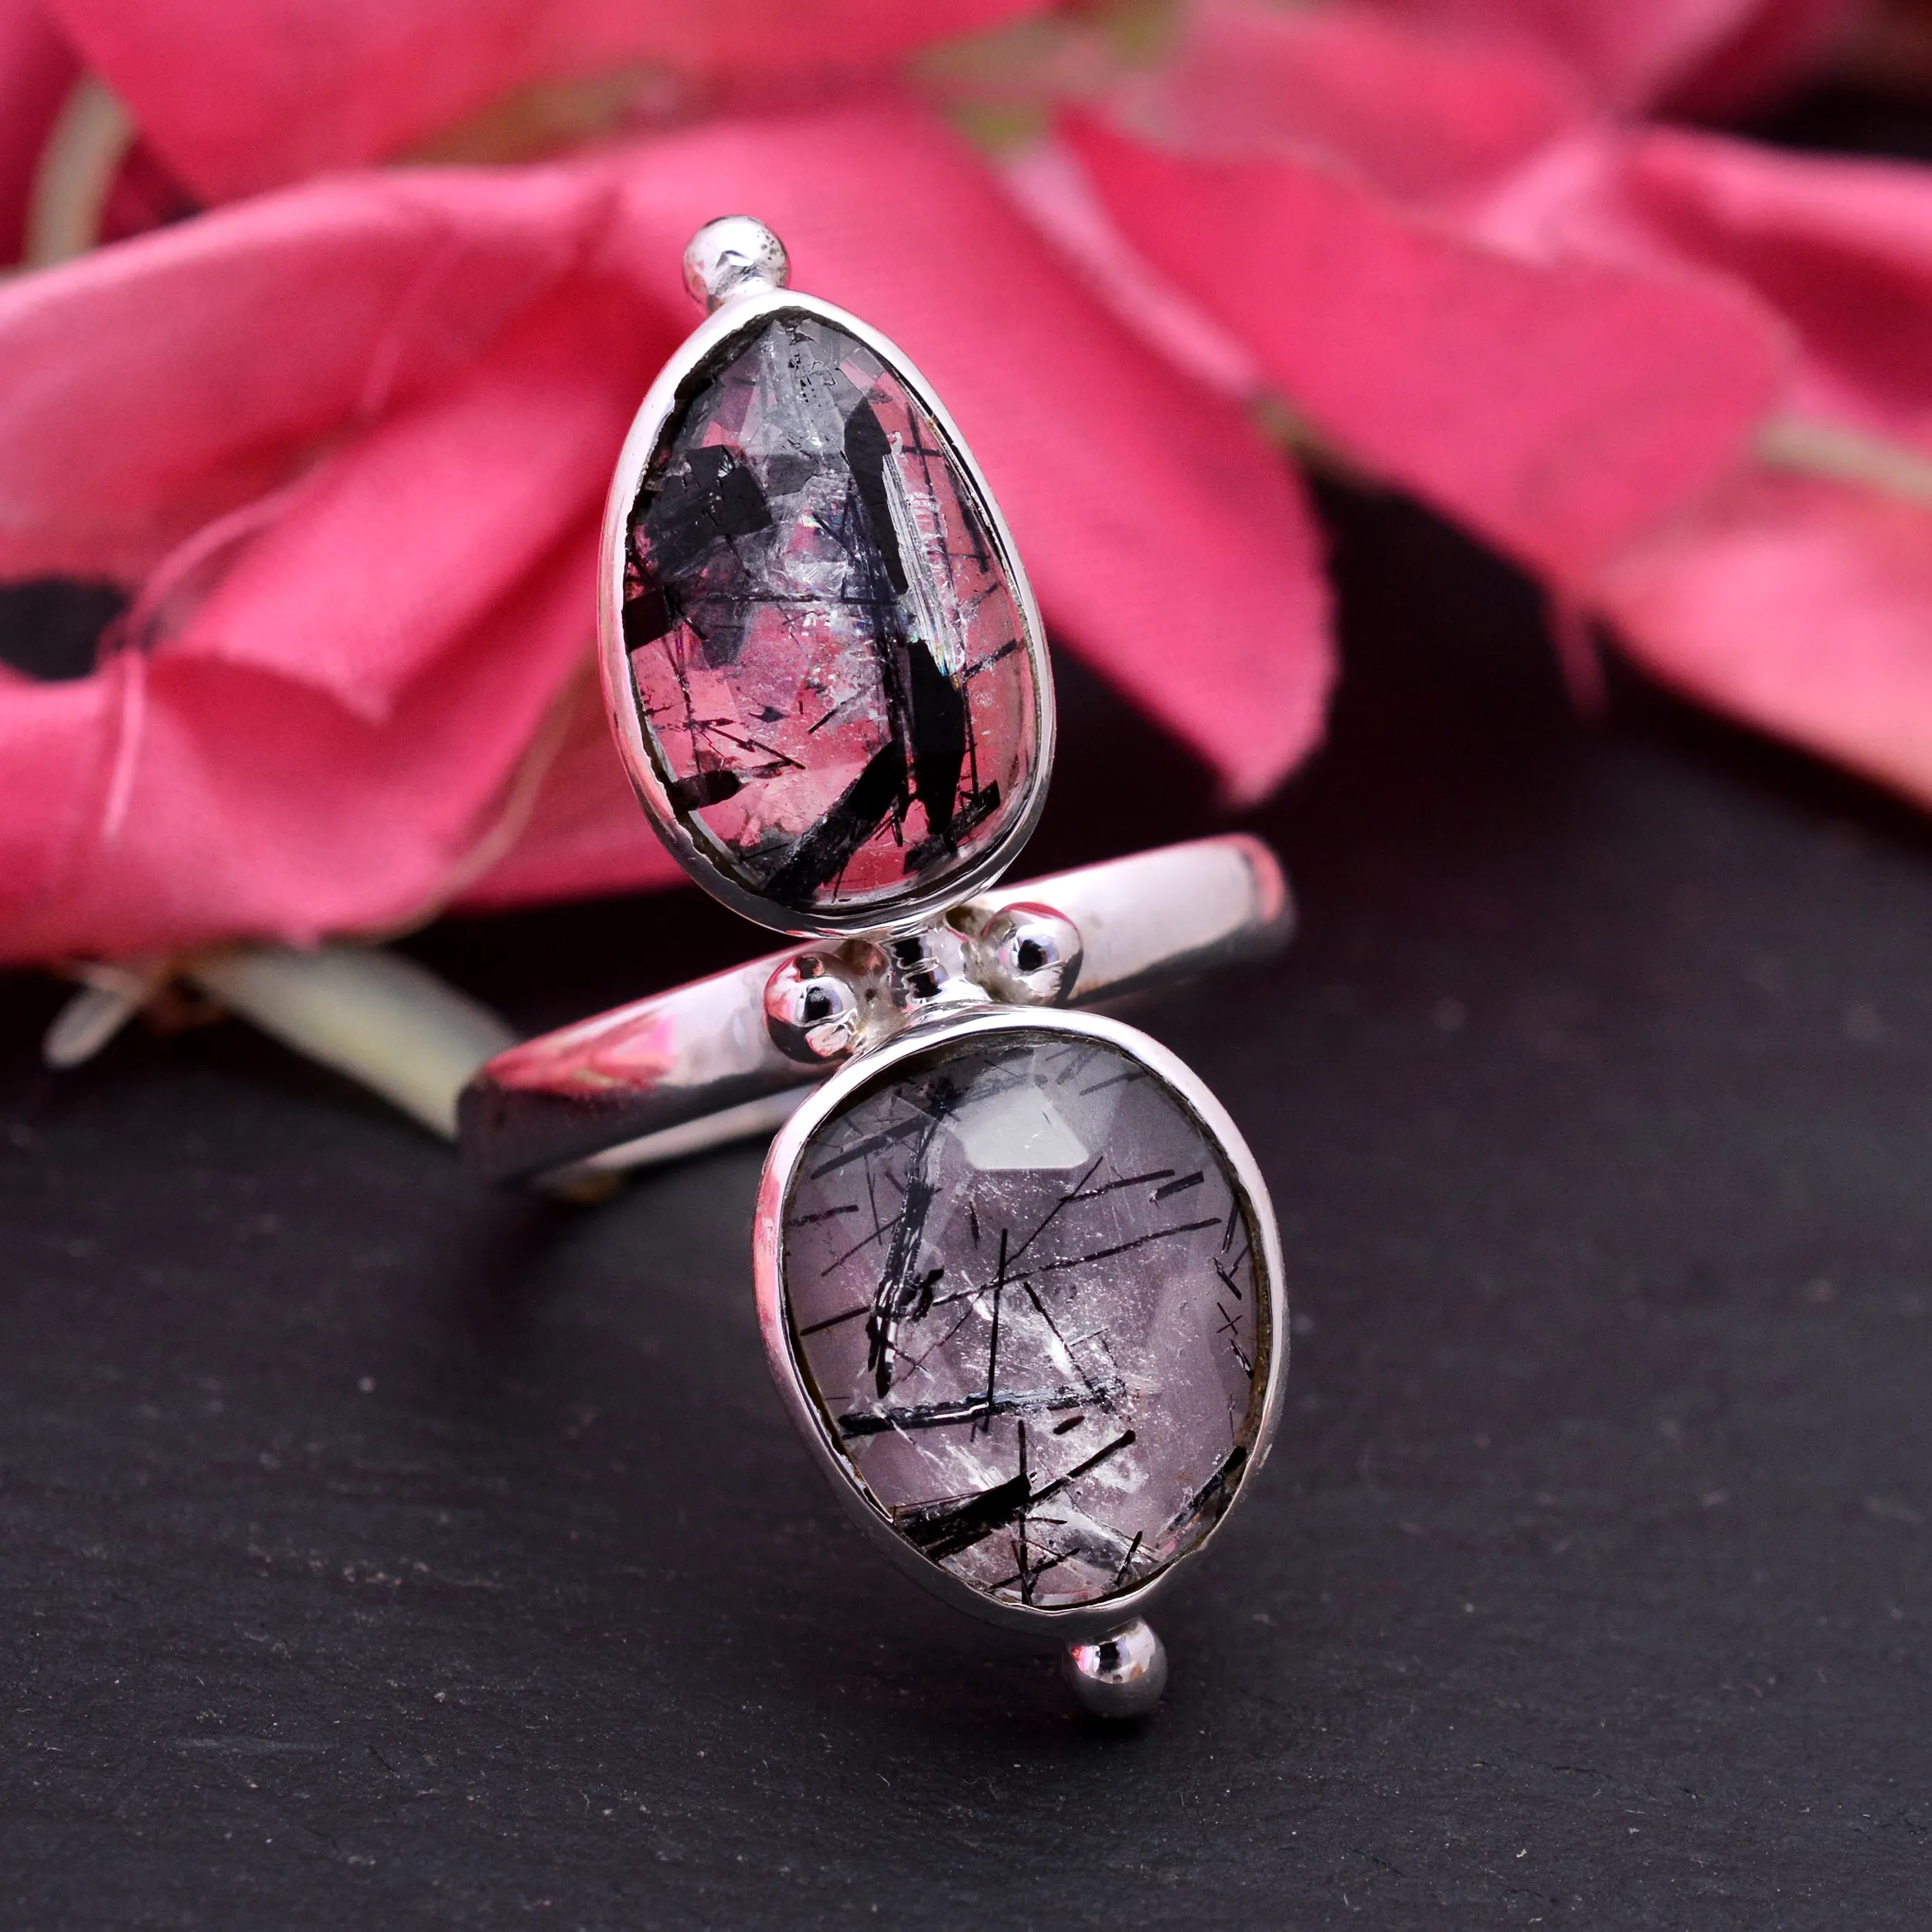 Christmas gift 925 Solid Silver Black Rutile Quartz 12x9mm oval Double Gemstone Ring 5.22 gms Sterling Silver girl finger rings